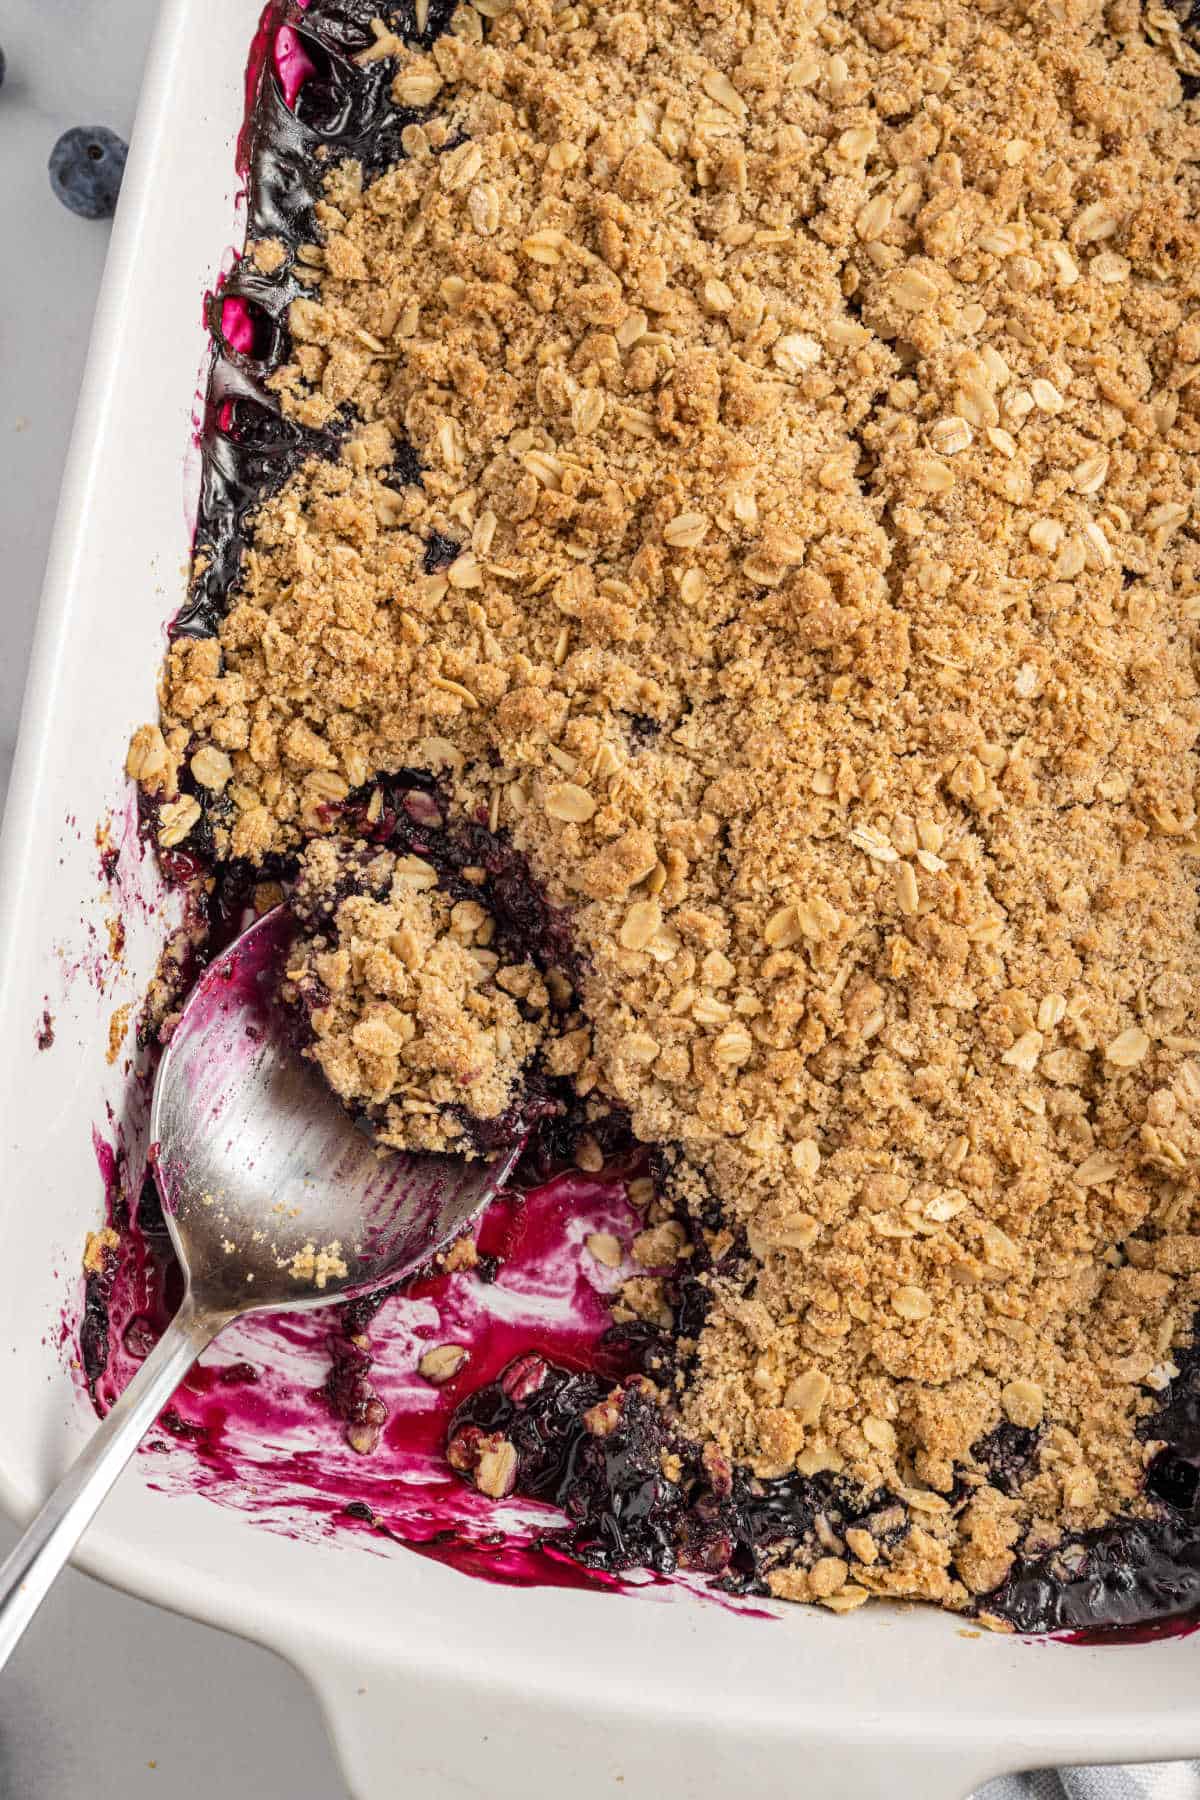 Blueberry crisp with oat topping in a 13x9 white baking dish with a spoon.